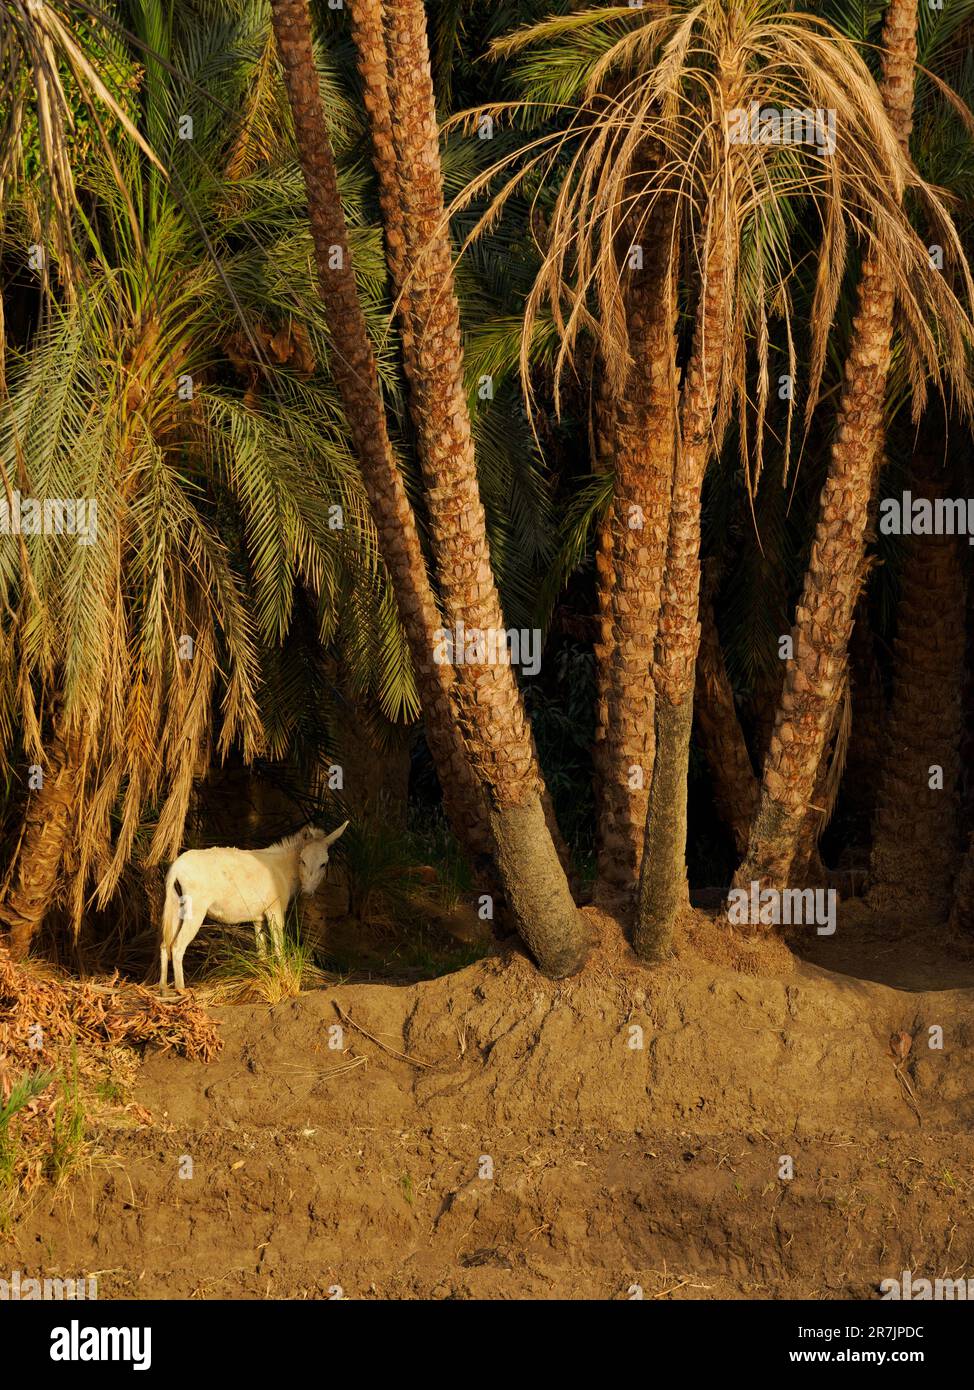 Mammal on River Bank Among Palm Trees in Jungle at Sunset. Stock Photo